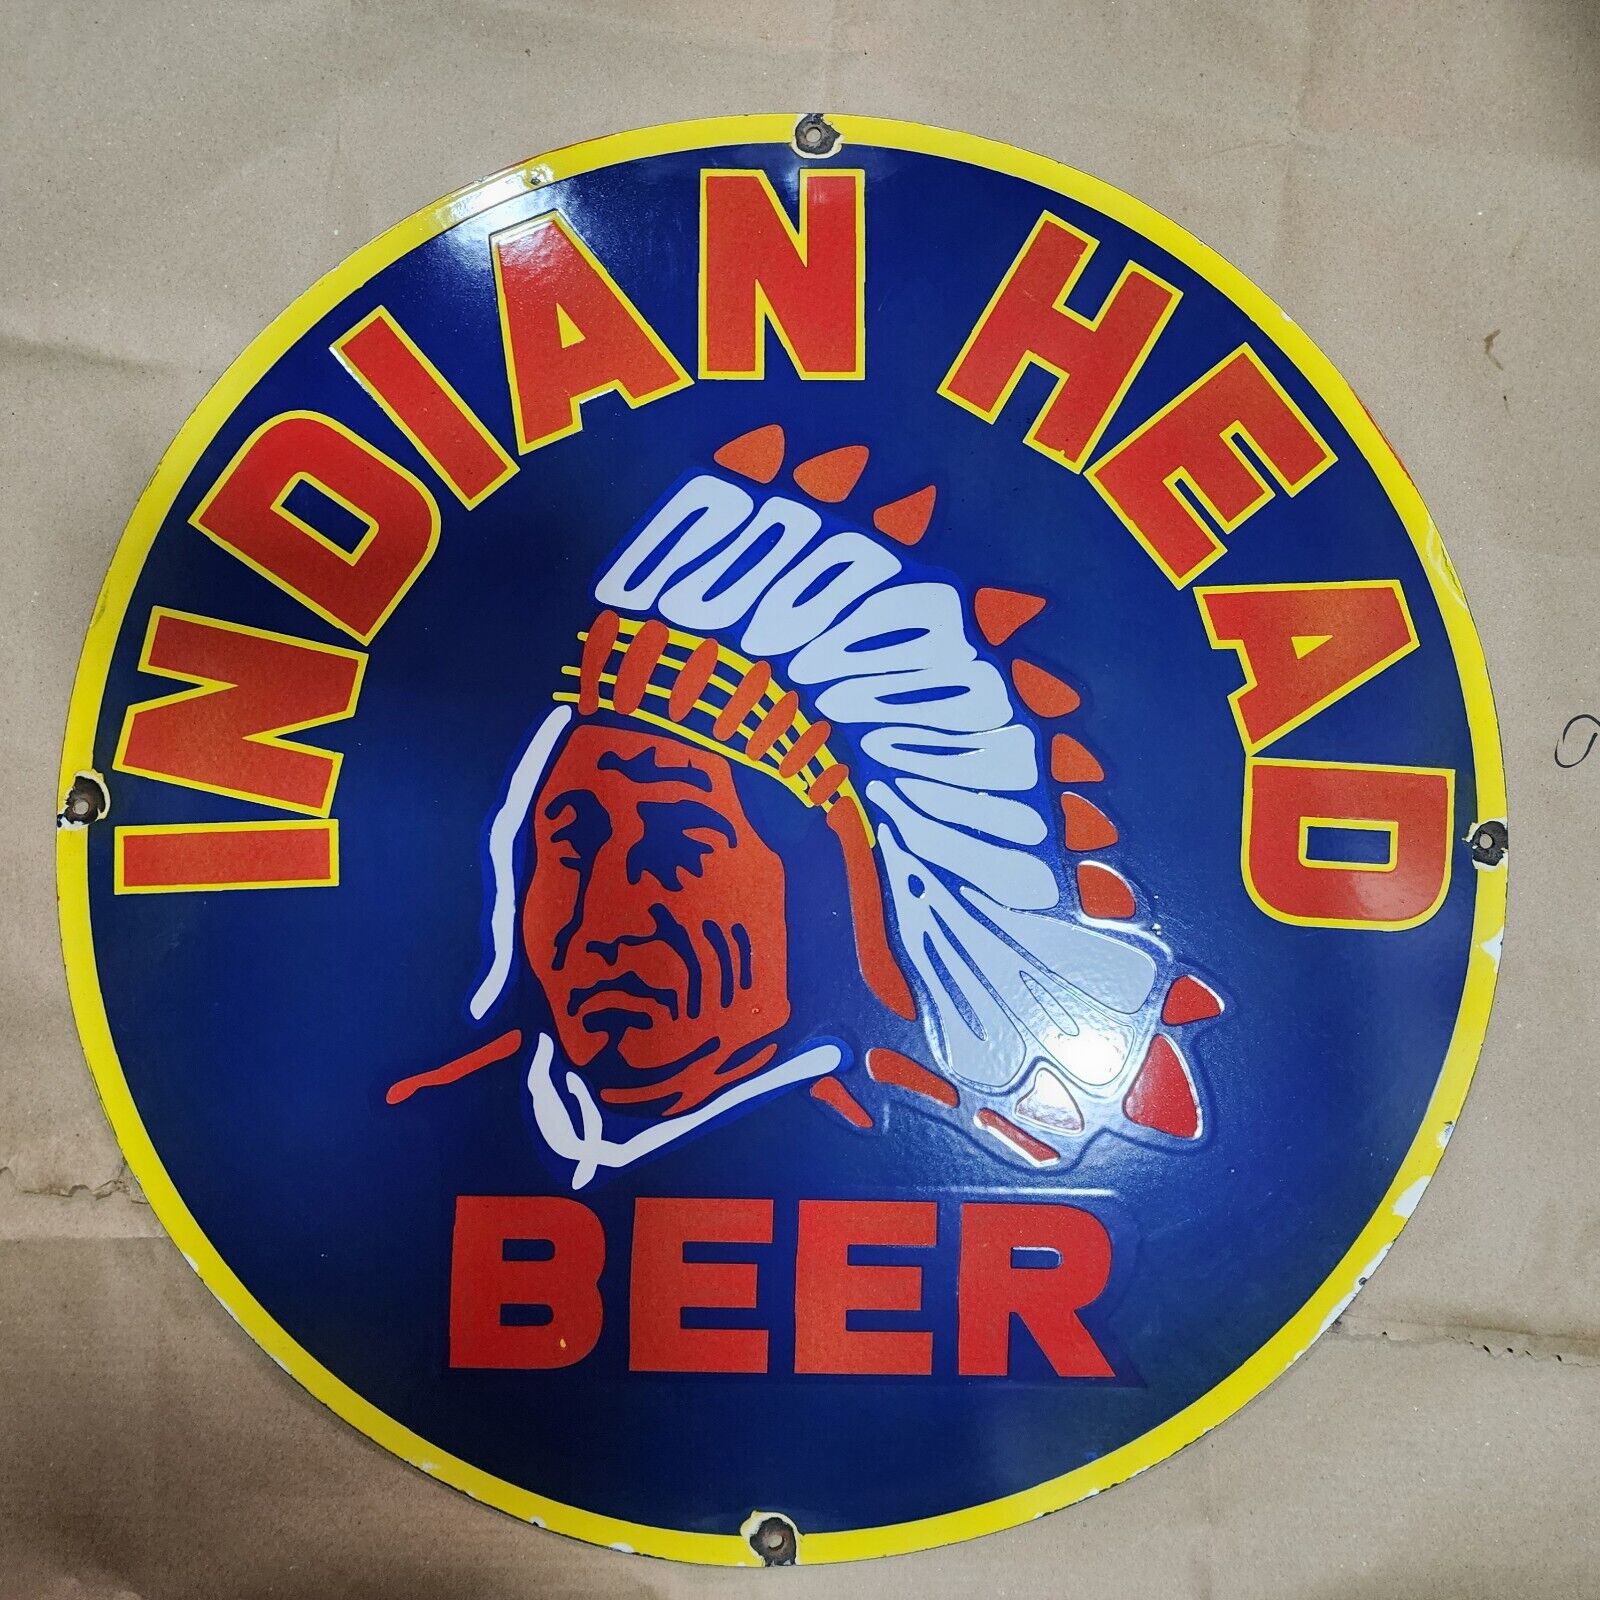 INDIAN HEAD BEER PORCELAIN ENAMEL SIGN 30 INCHES ROUND